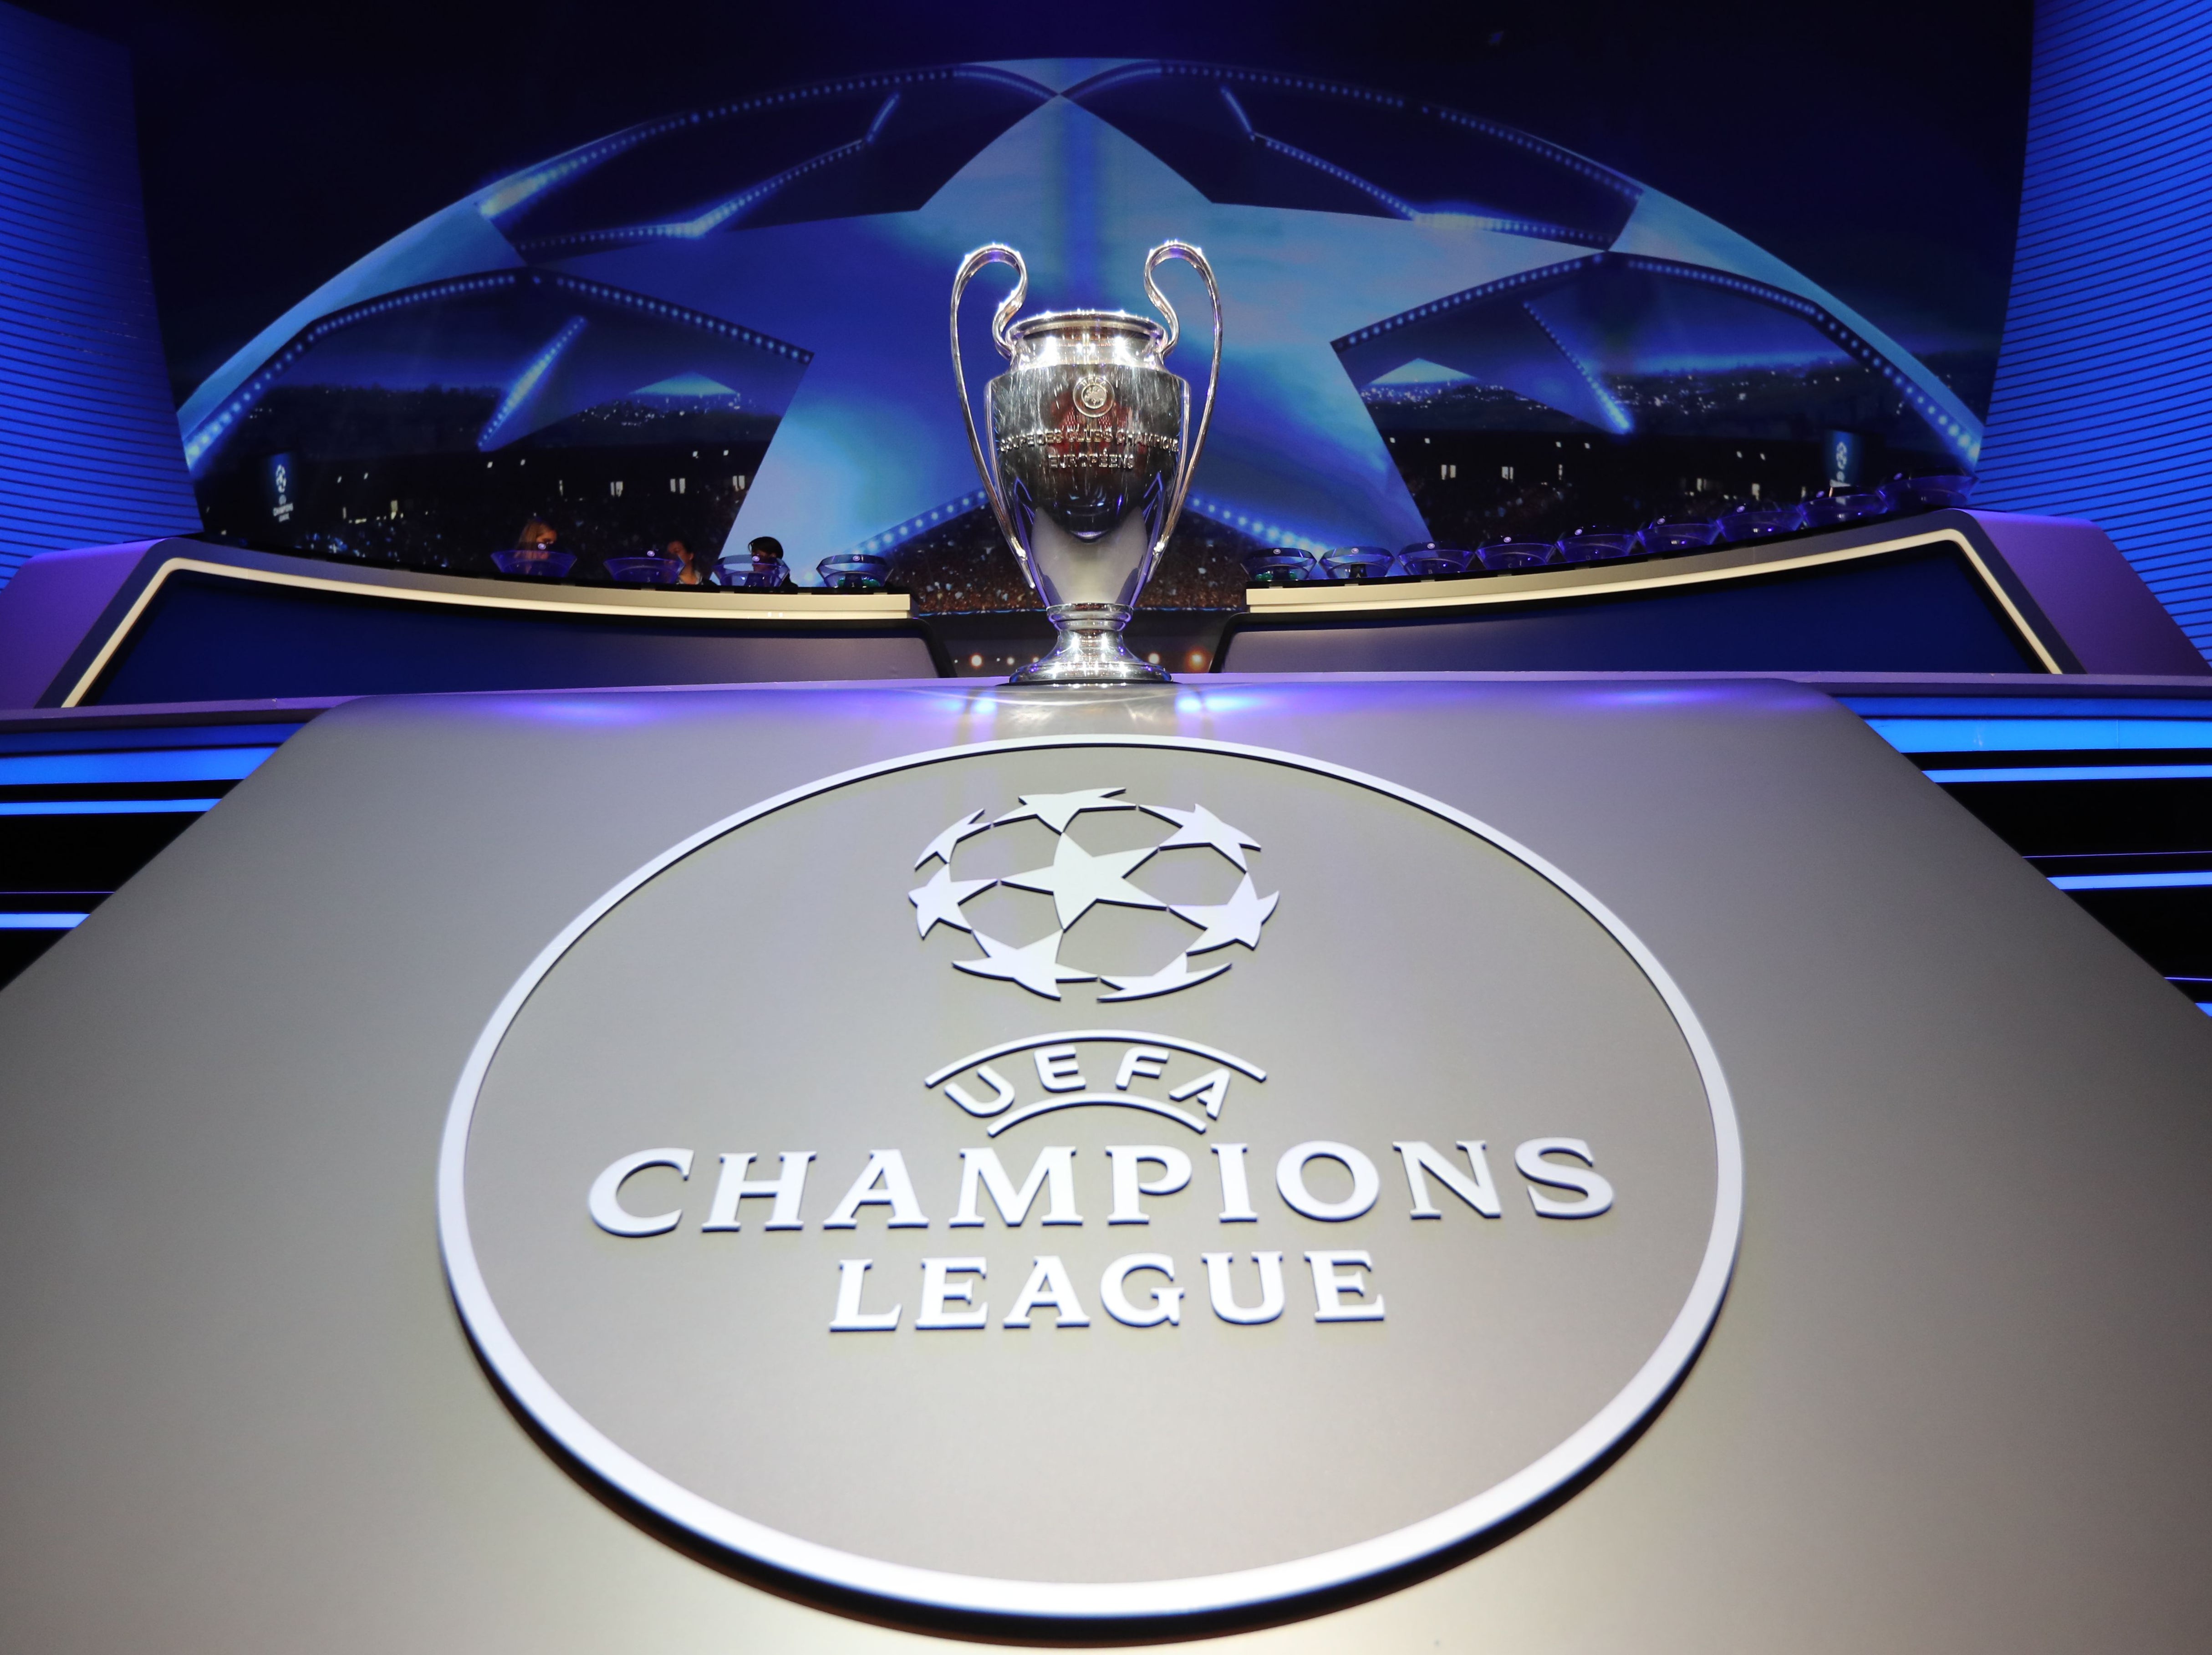 A Champions League revamp was discussed last week